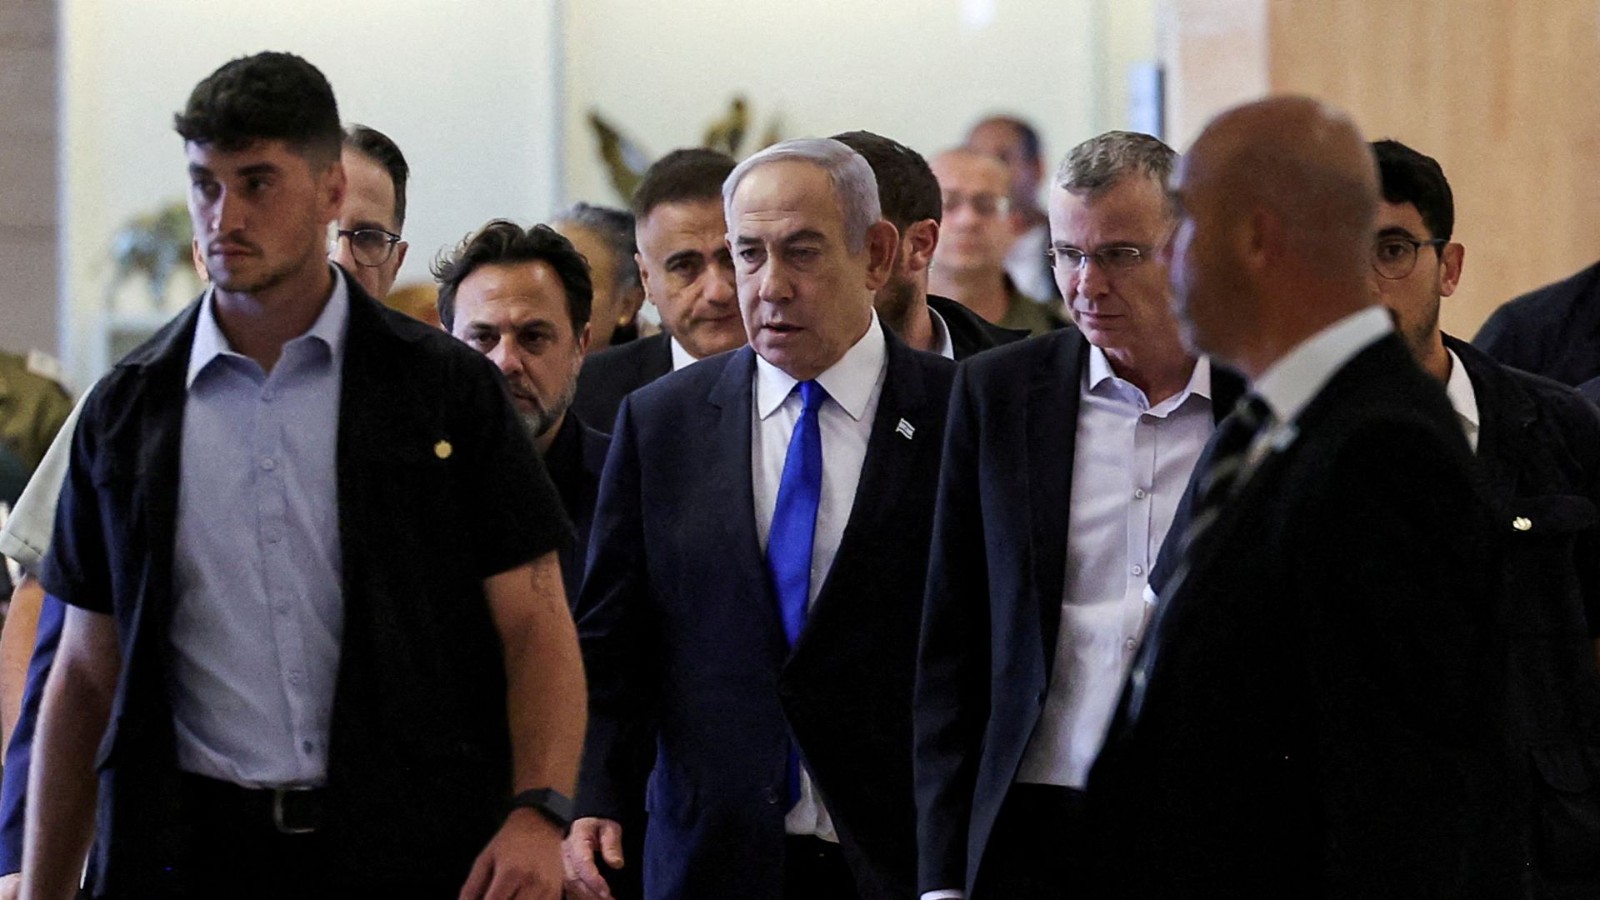 Netanyahu arrives to a recent Likud party faction meeting at the Knesset. / Ronen Zvulun/File/Reuters
